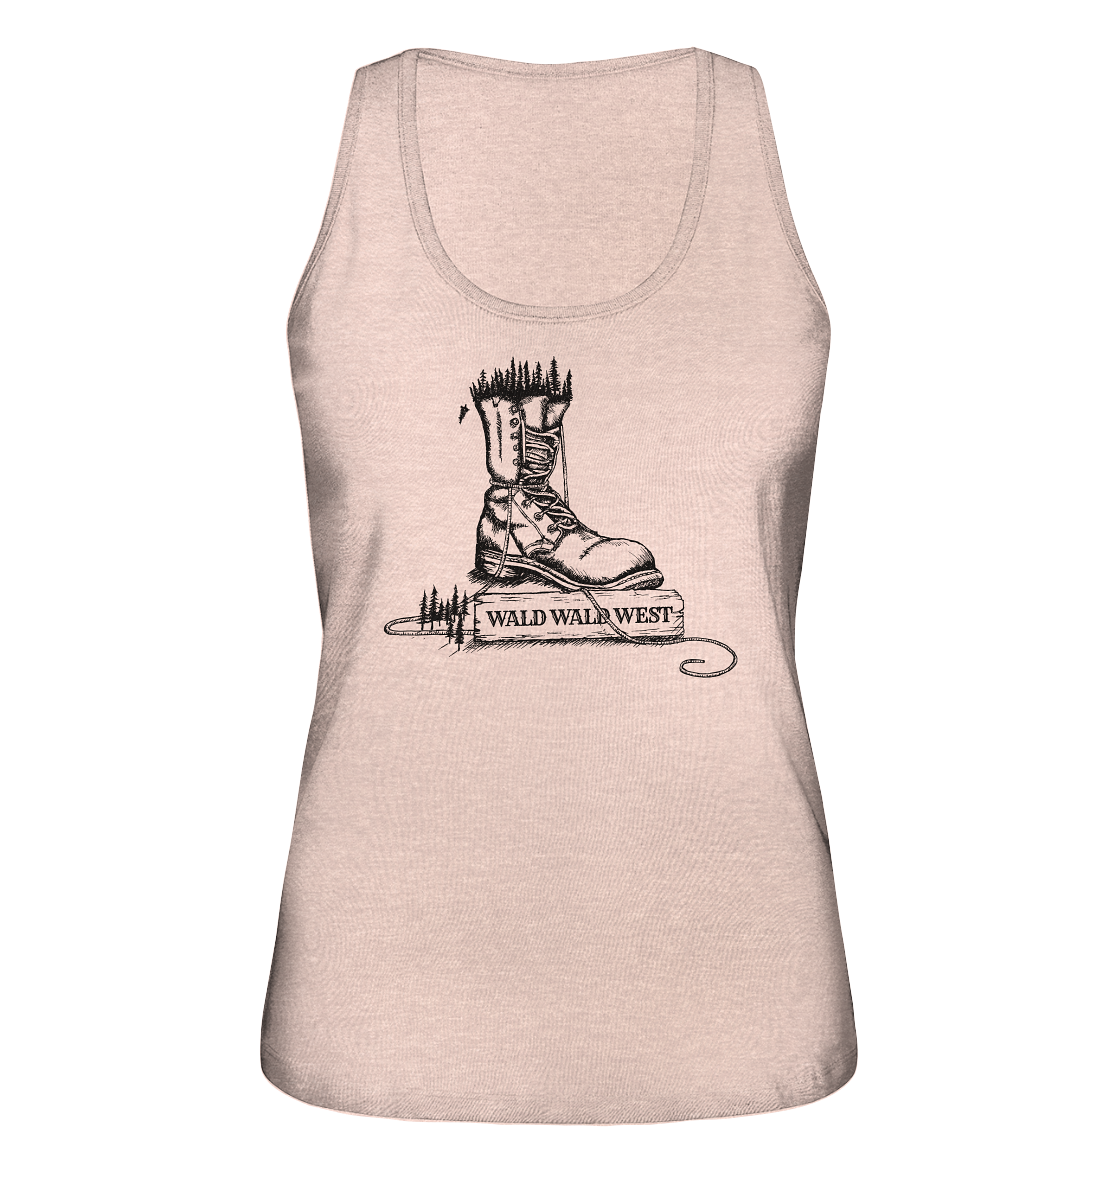 front-ladies-organic-tank-top-ffded6-1116x.png